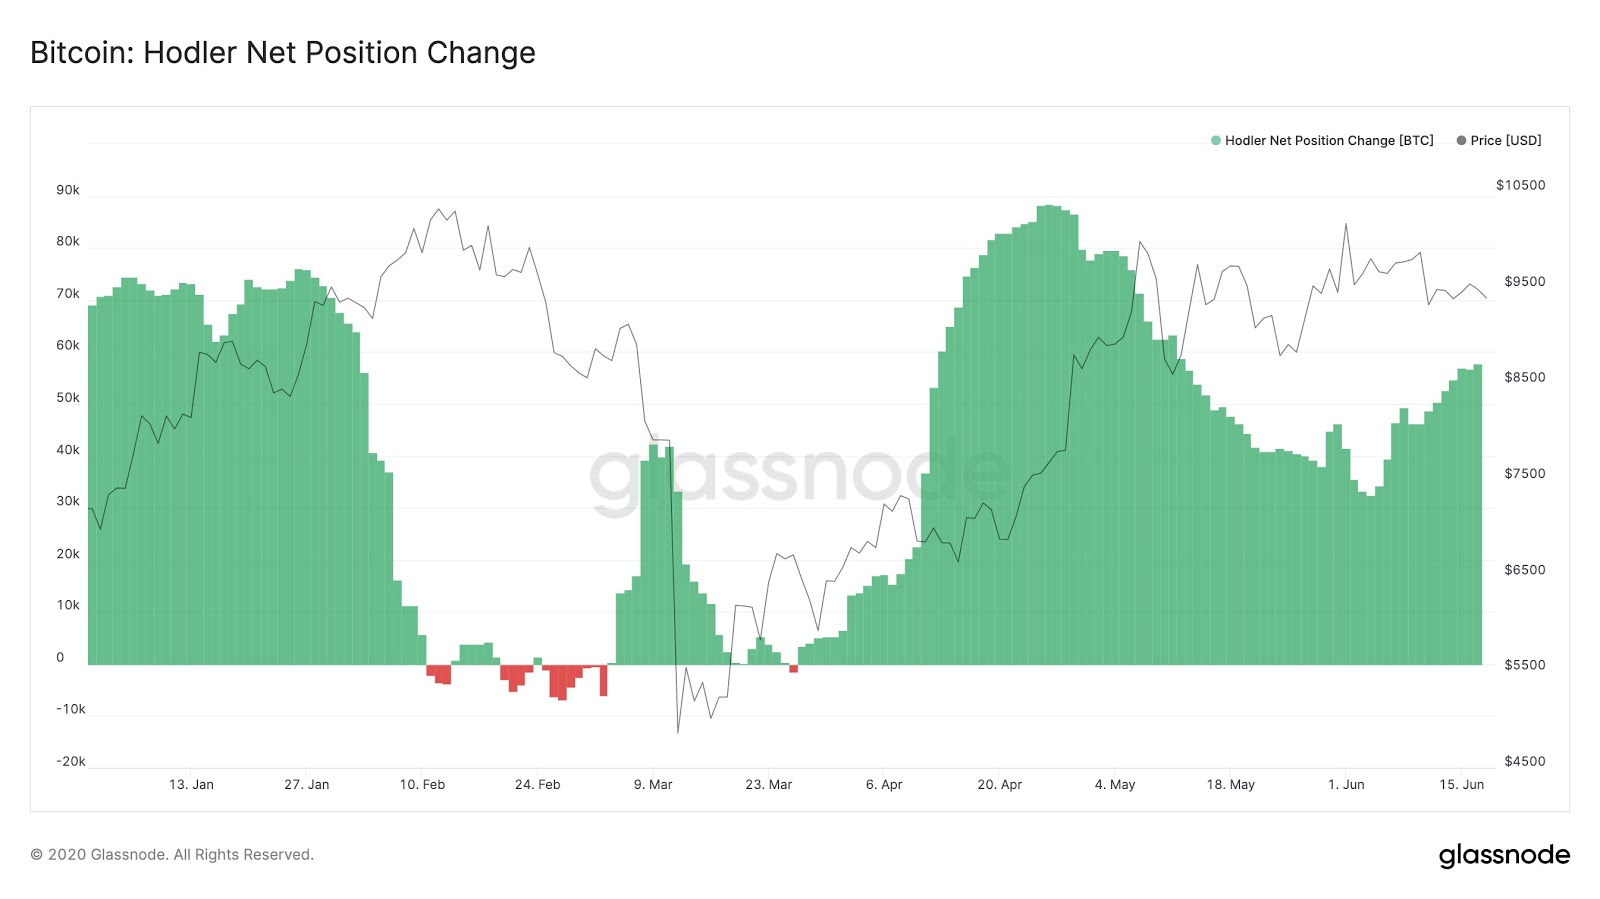 Bitcoin hodler net position change year to date chart